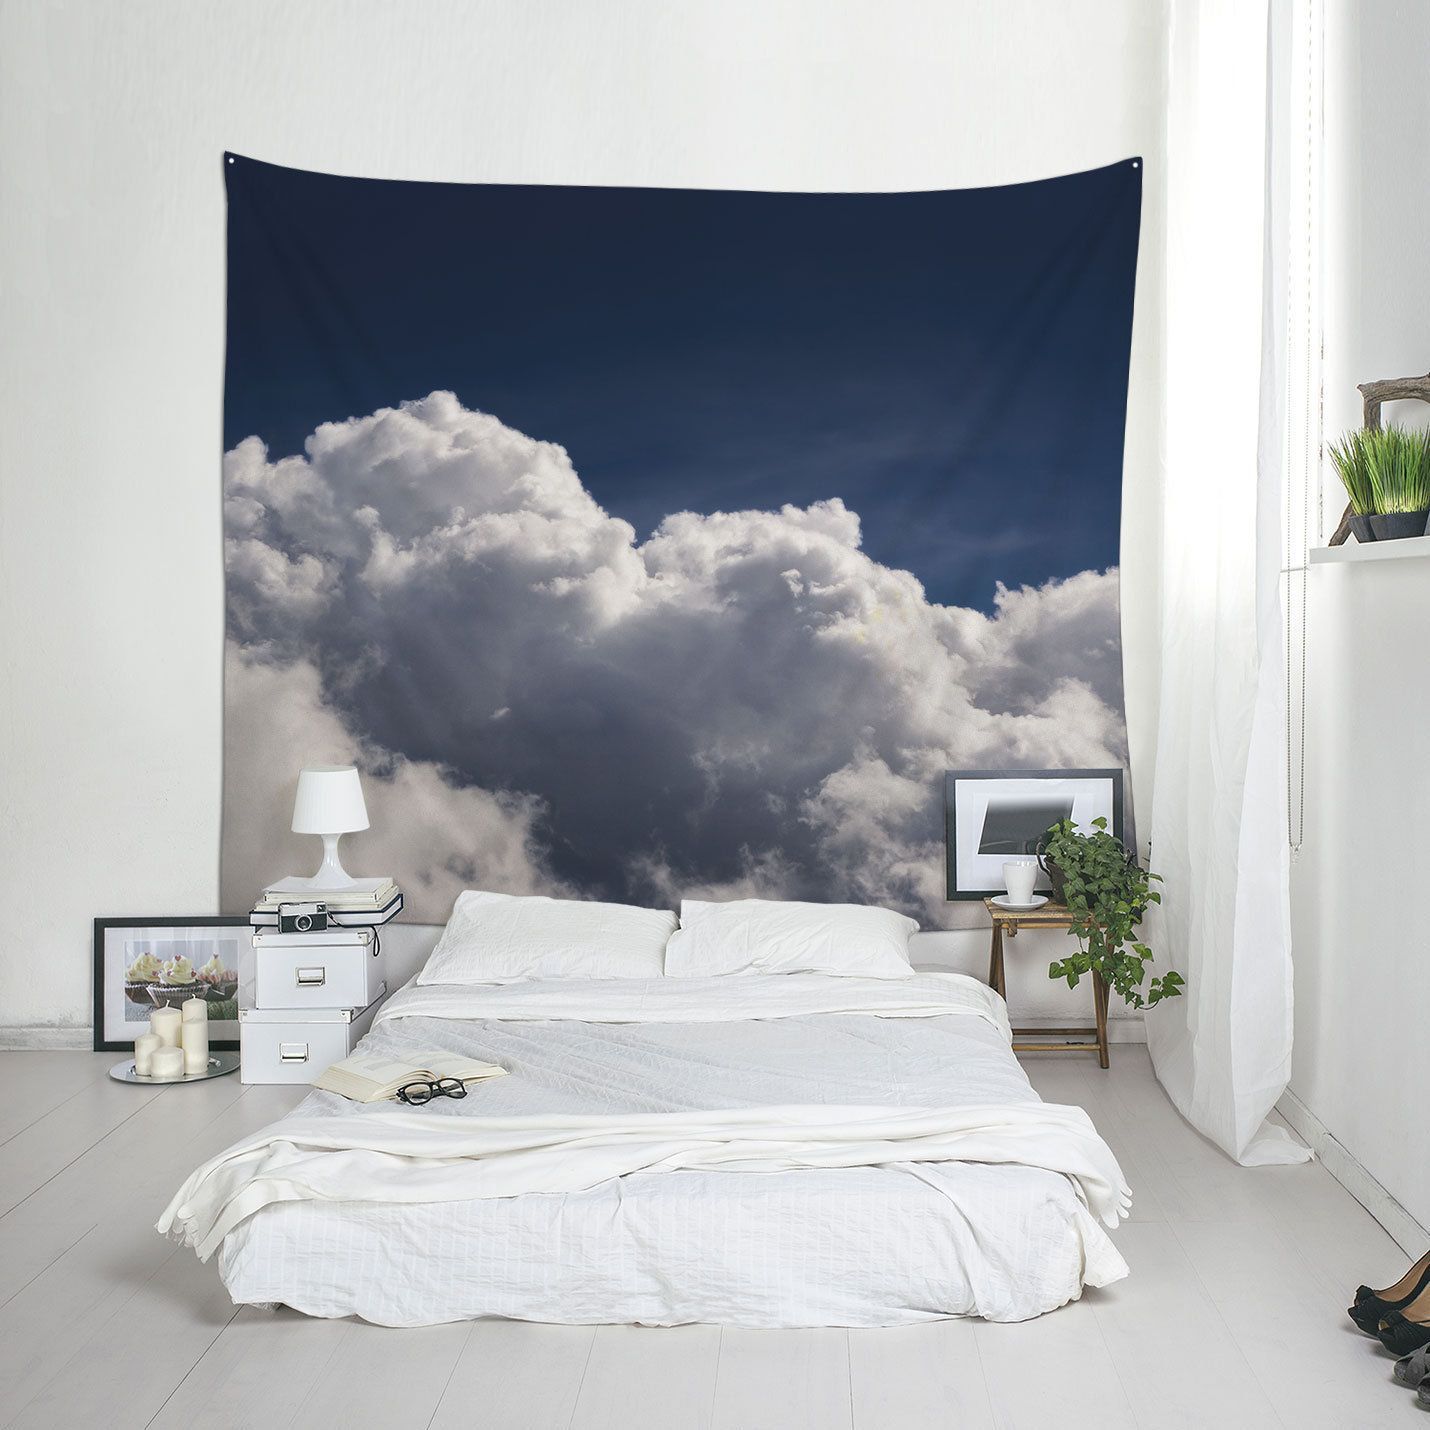 Cloudscape Tapestry Under A Navy Blue Sky Dorm Wall Art Or Regarding 2017 Blended Fabric Ranier Wall Hangings With Hanging Accessories Included (View 17 of 20)